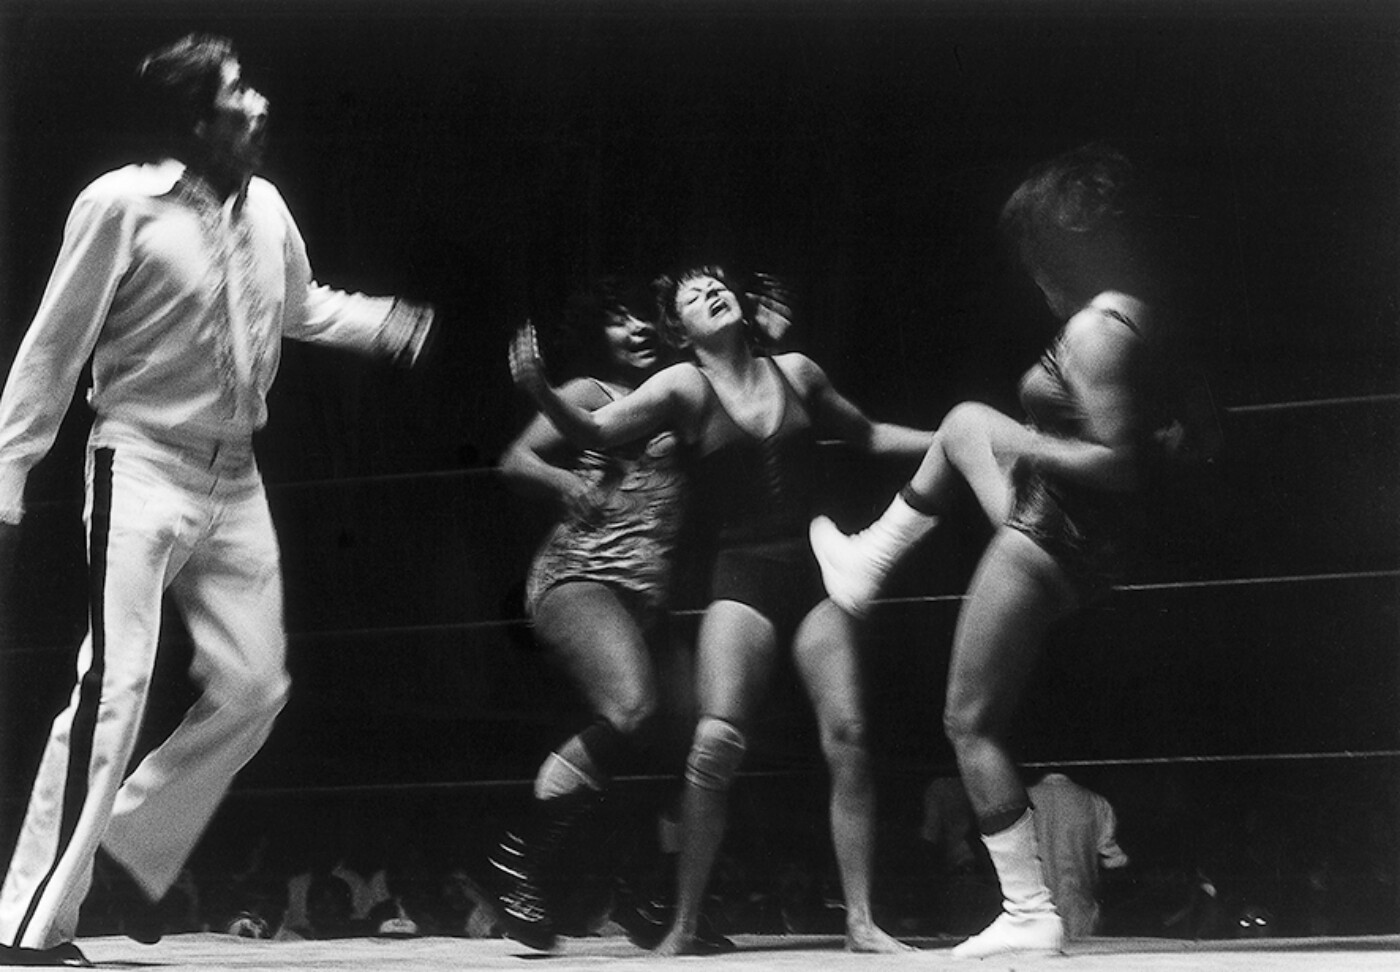 A black-and-white horizontal photograph depicts four figures against a saturated black background. At center, a woman wearing a dark leotard stands with legs spread and arms thrown out, slightly blurry with motion. Her head is cast back, and her arms are open. Behind her, a second woman seems to run up to support her, one hand reaching for her head, another coming up to support her arm. Right of them, a third woman leans on her left leg, while her right white-booted foot kicks out at the stomach of the first woman. At the left edge, a man dressed in white springs into the frame, his bent legs suggesting that he is mid-jump. The drooping horizontal lines of two ropes can be seen on the right edge of the photograph, suggesting that the action takes place in a wrestling ring.